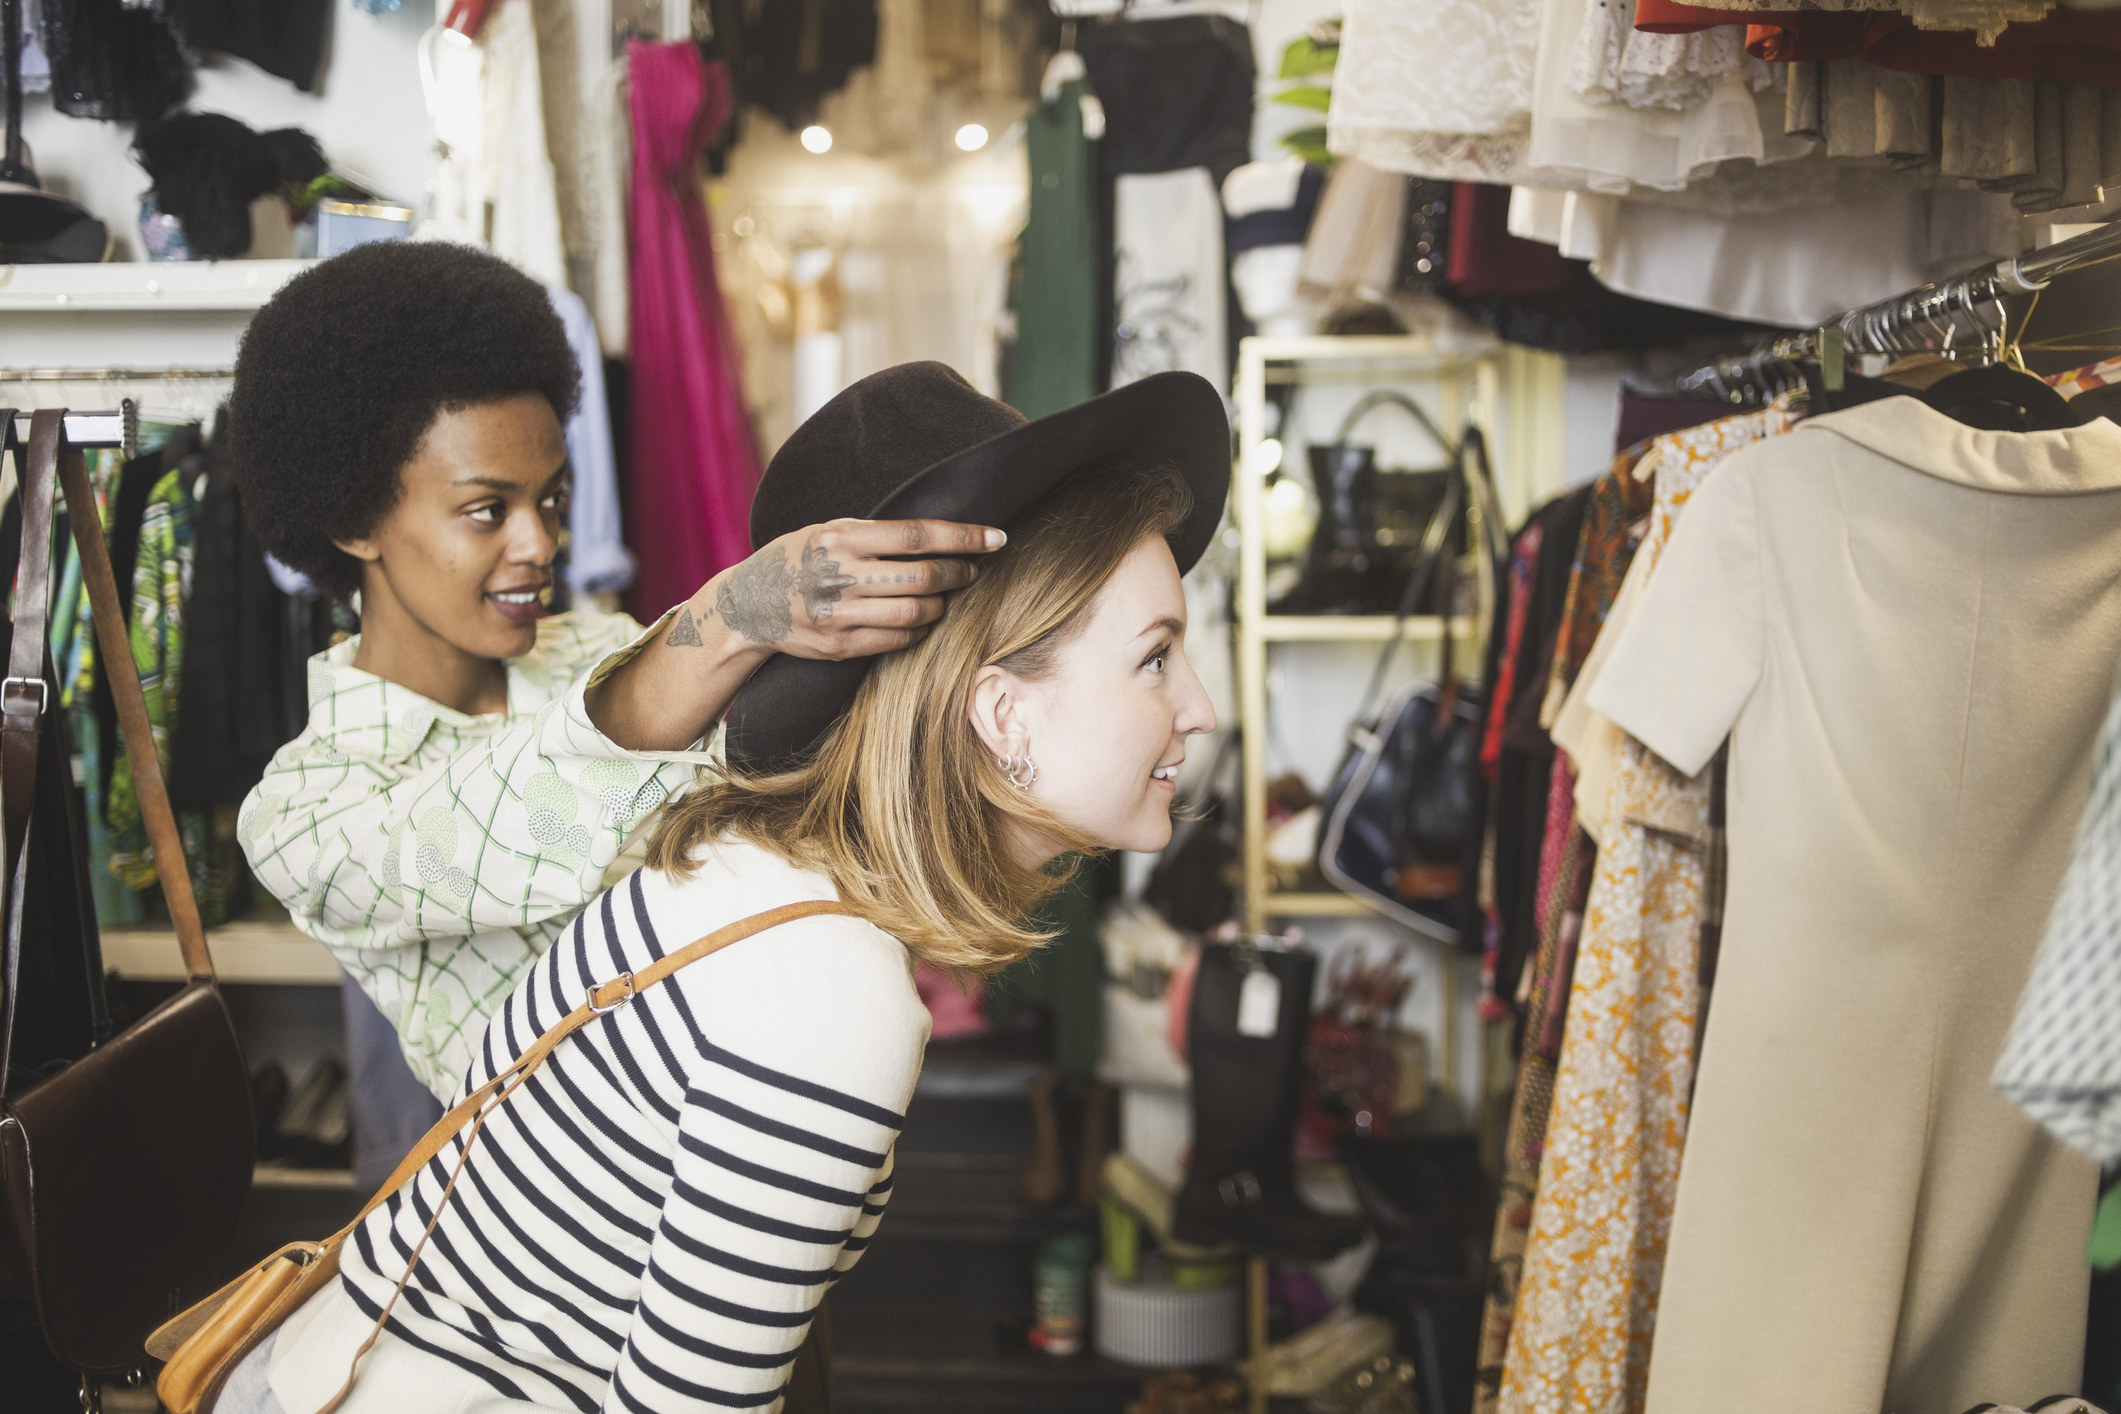 A worker helping a woman in a thrift store